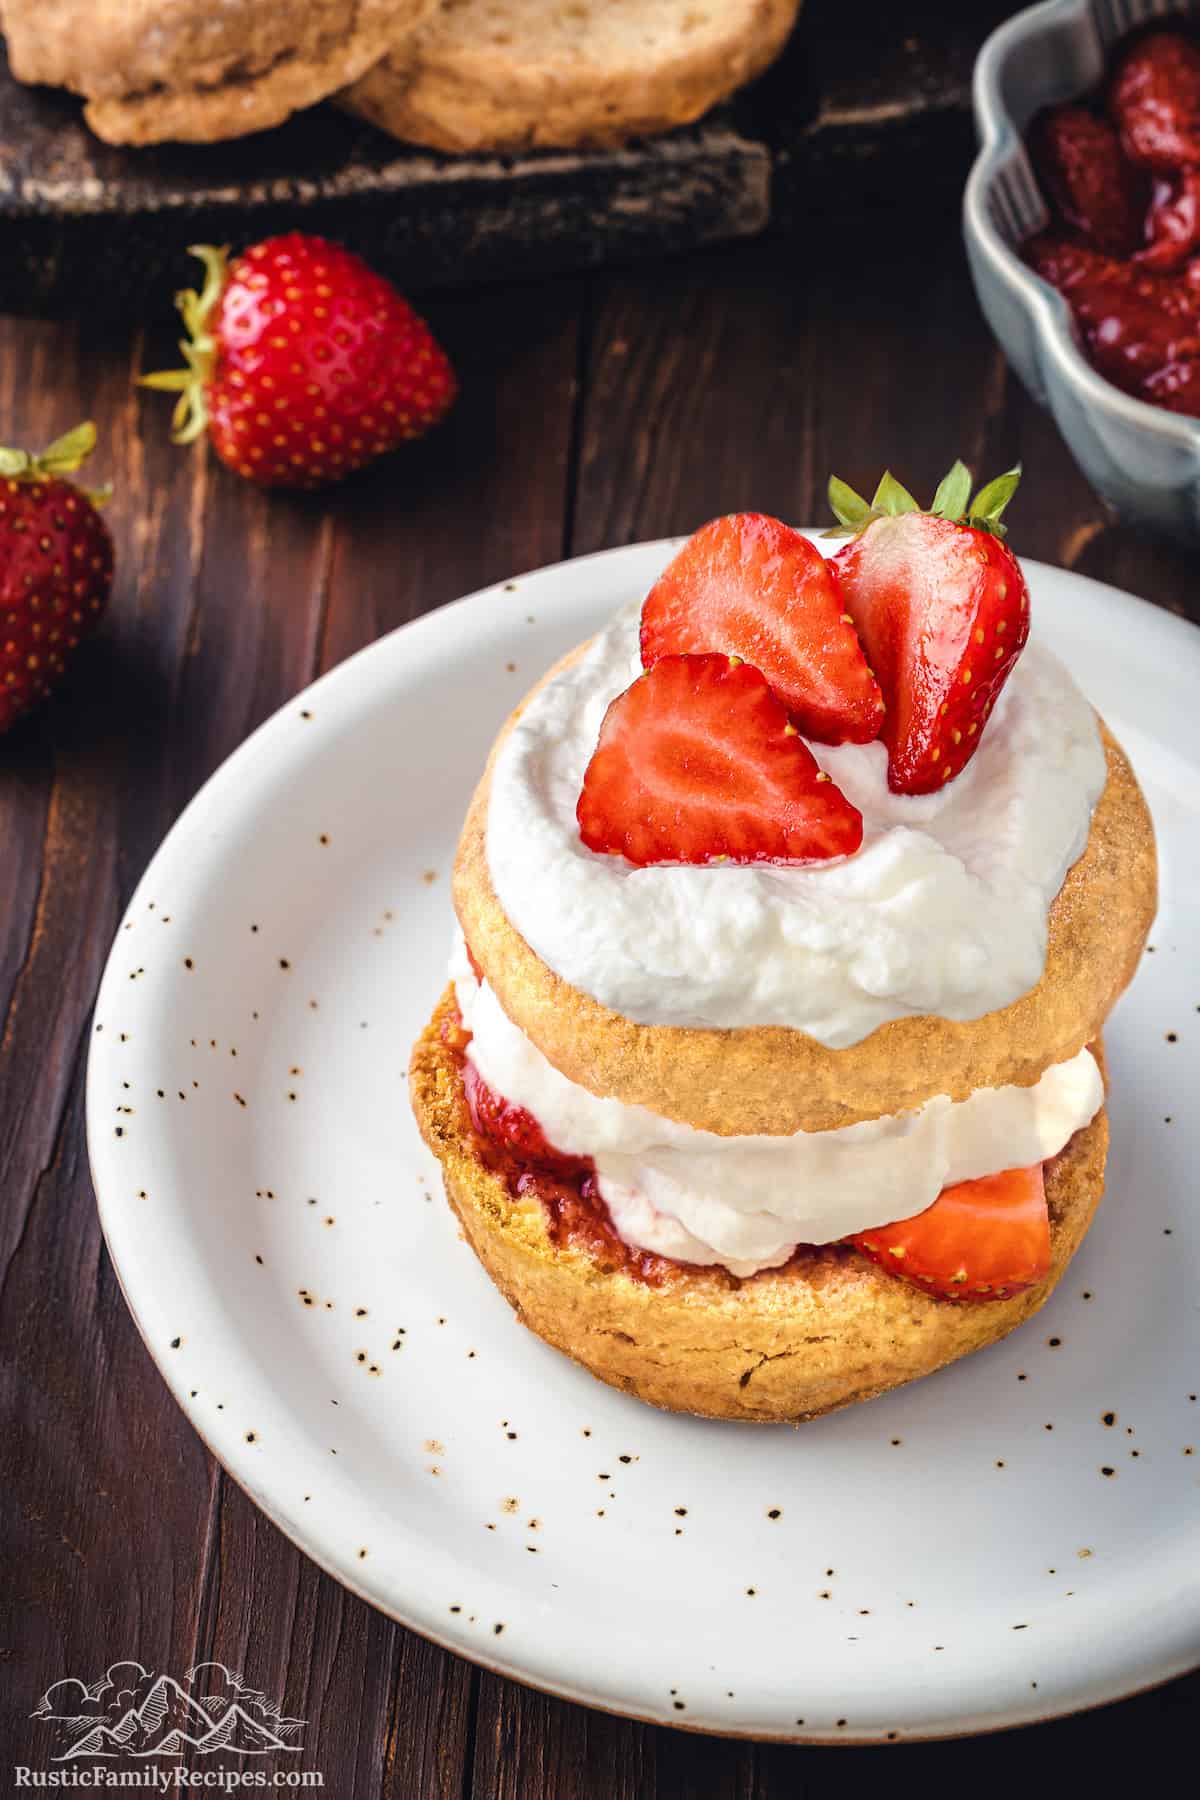 Strawberries, whipped cream, strawberries and a shortcake on a plate